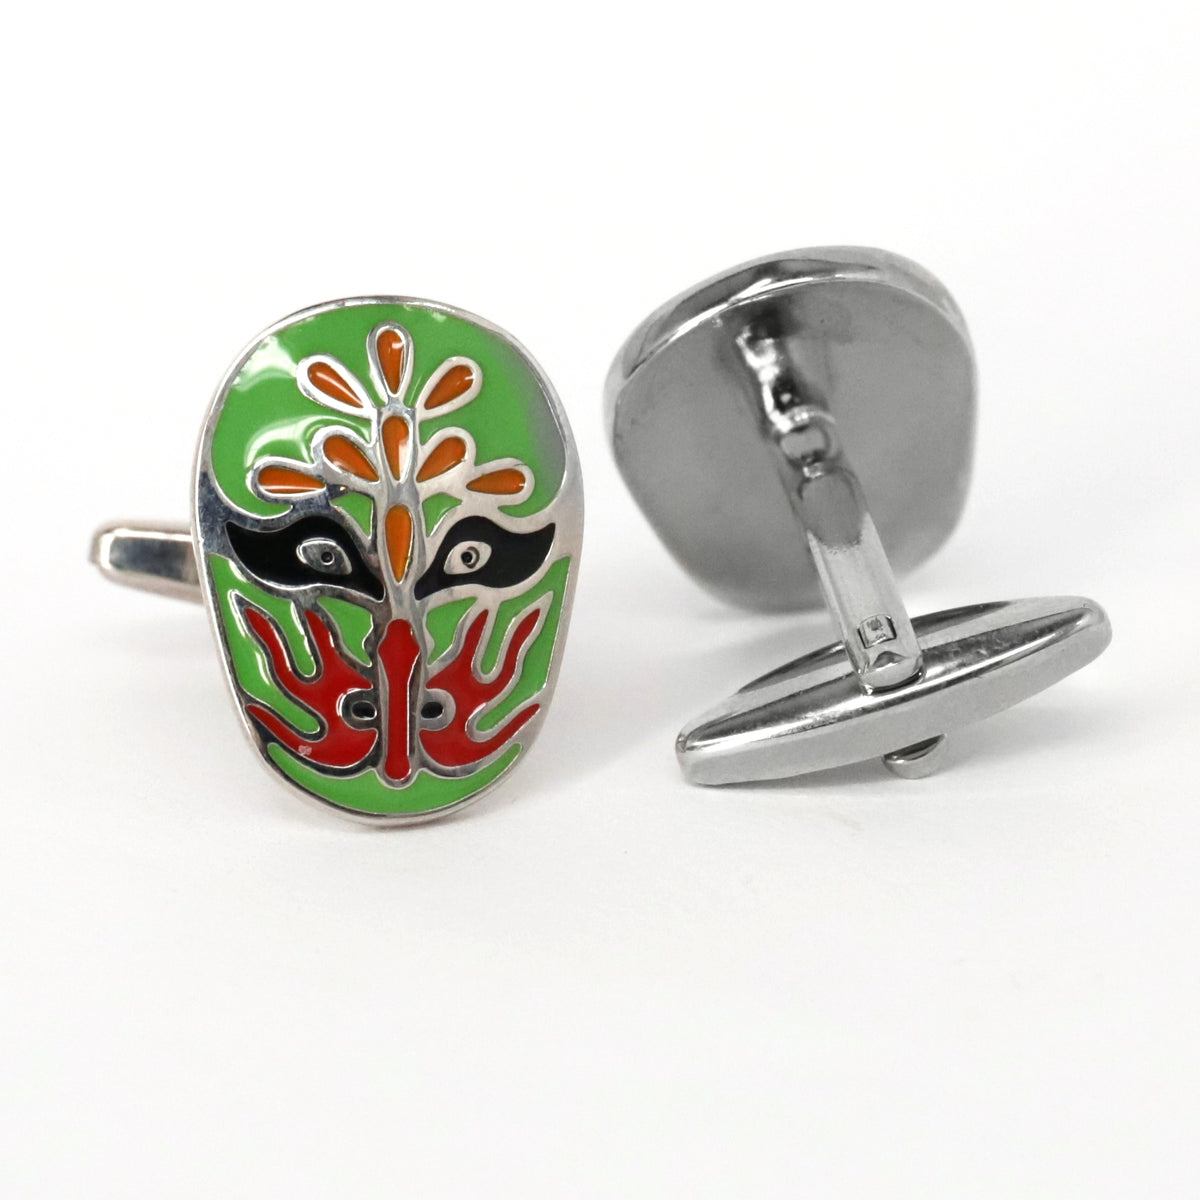 Jing Mask or Chinese Opera mask  green Cufflinks (Online Exclusive)